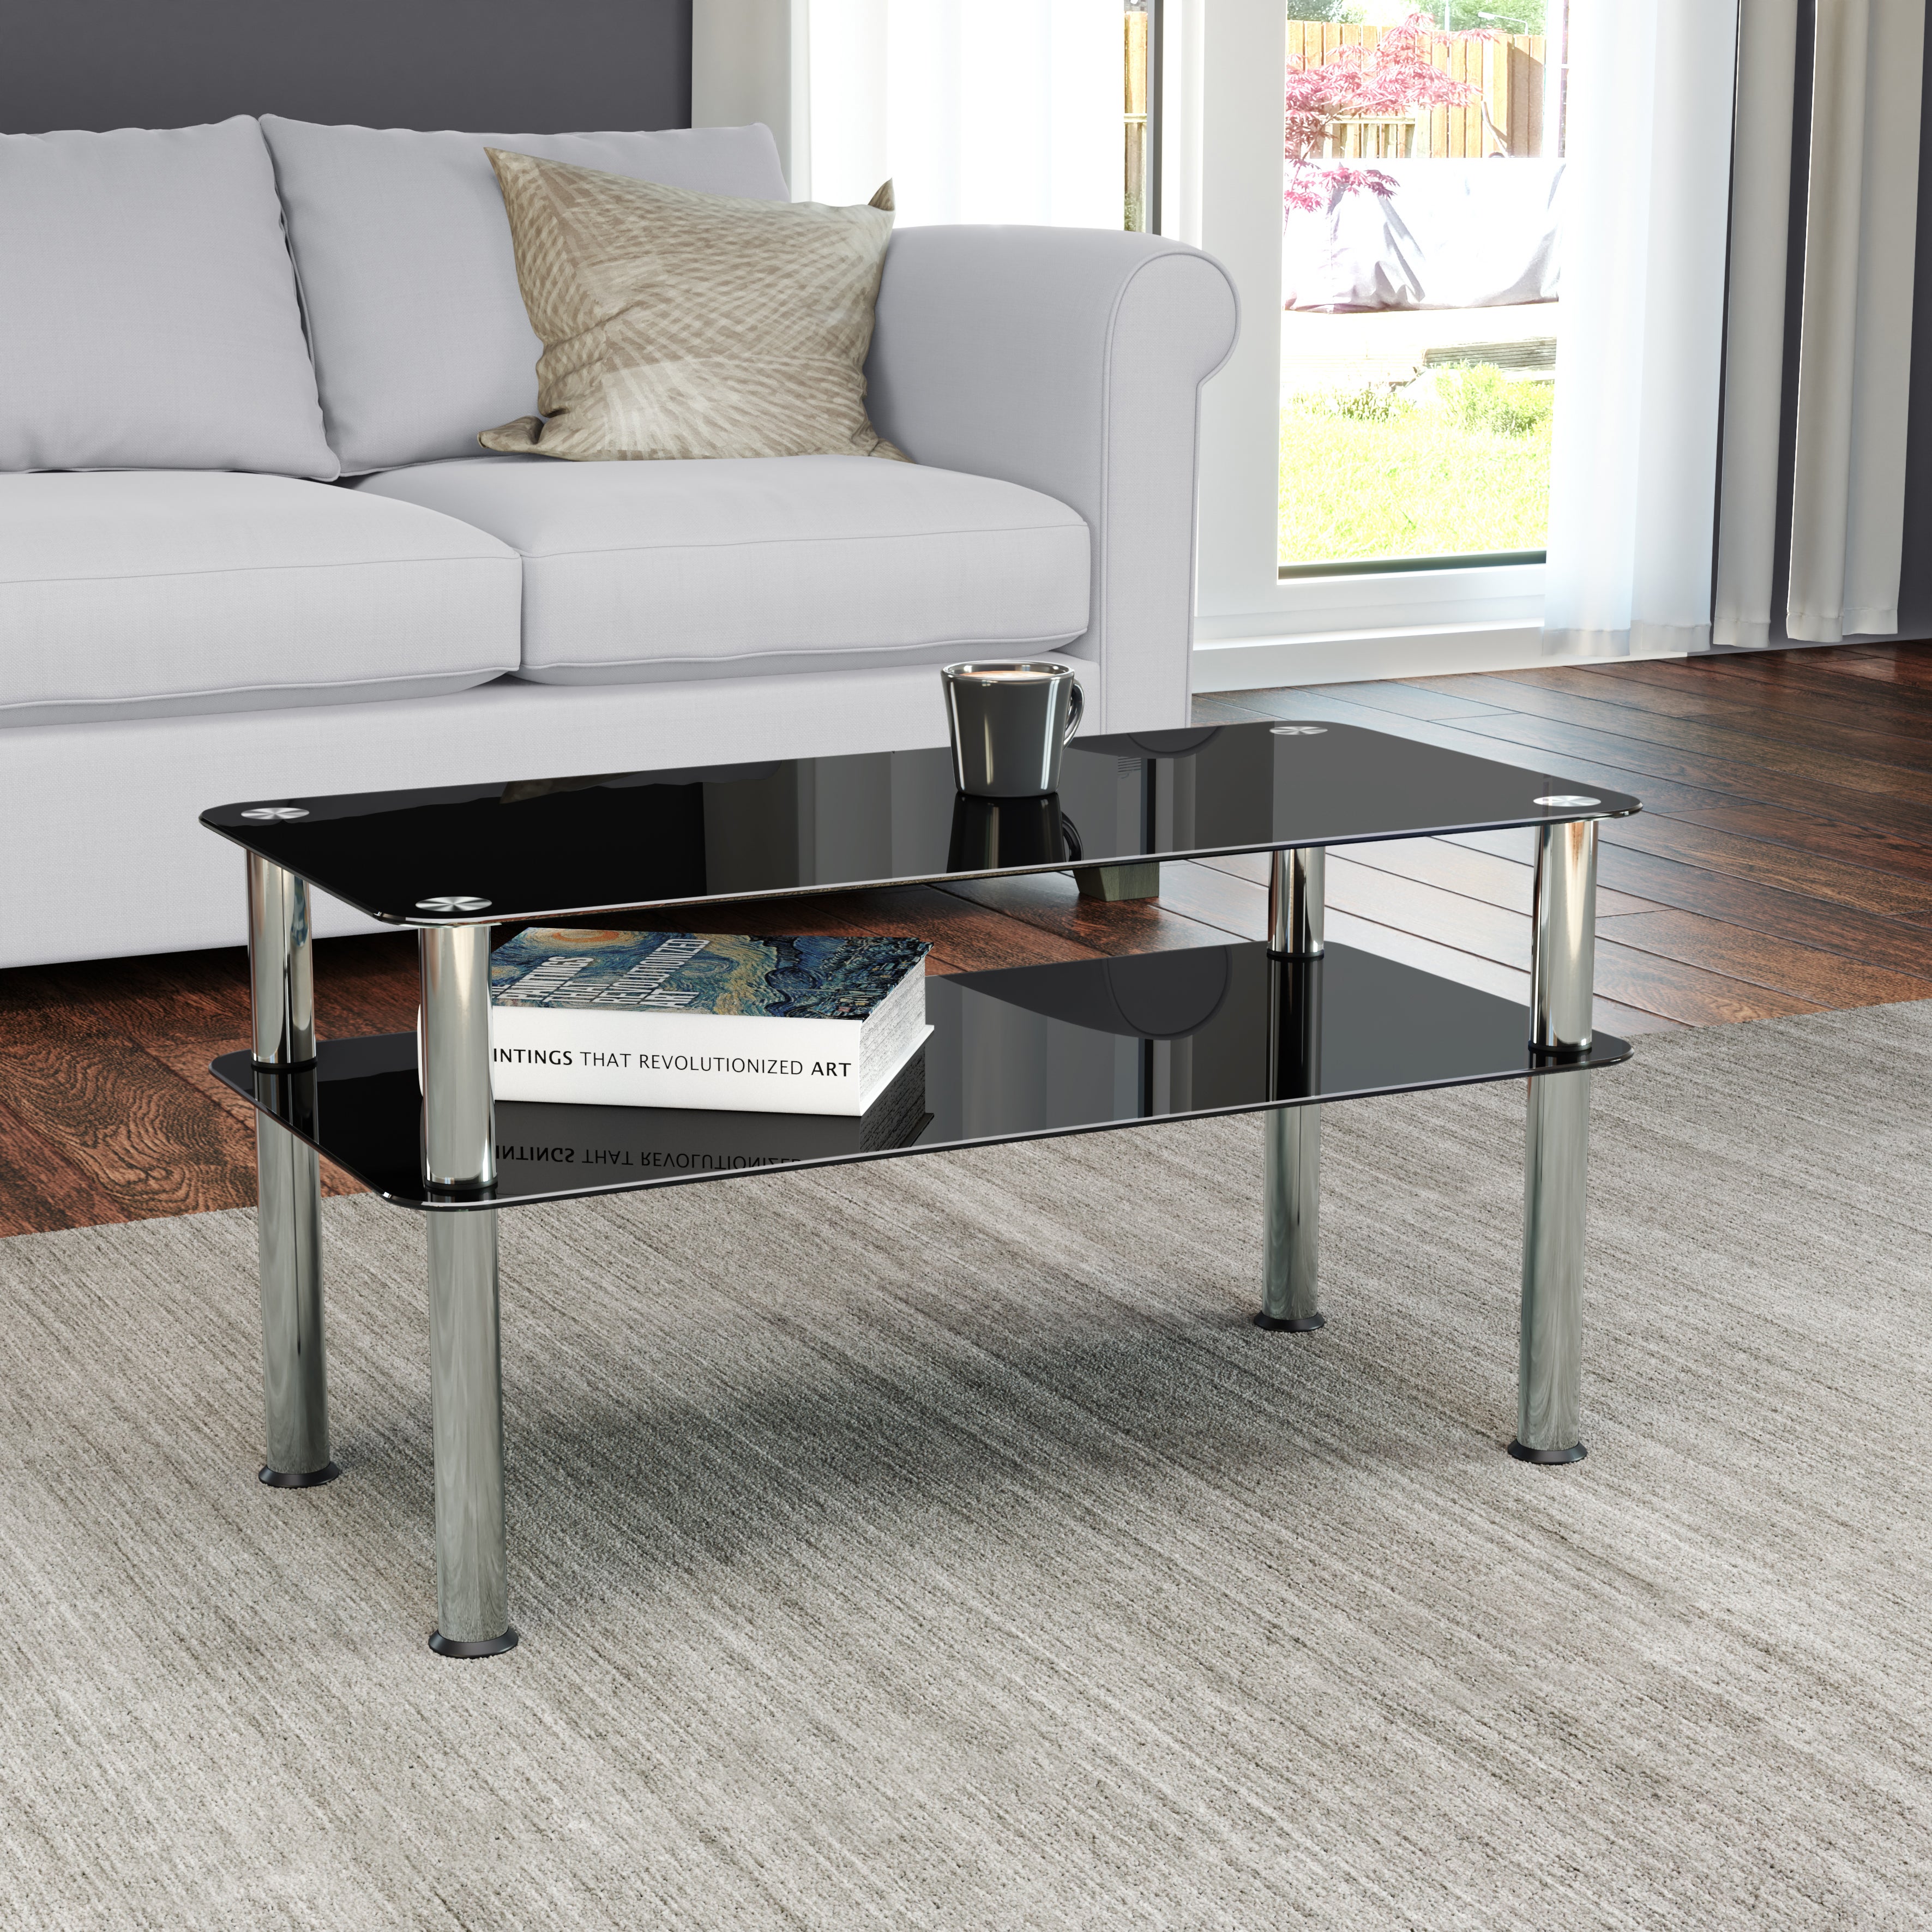 Avf Small Coffee Table Black Glass With Chrome Legs Black